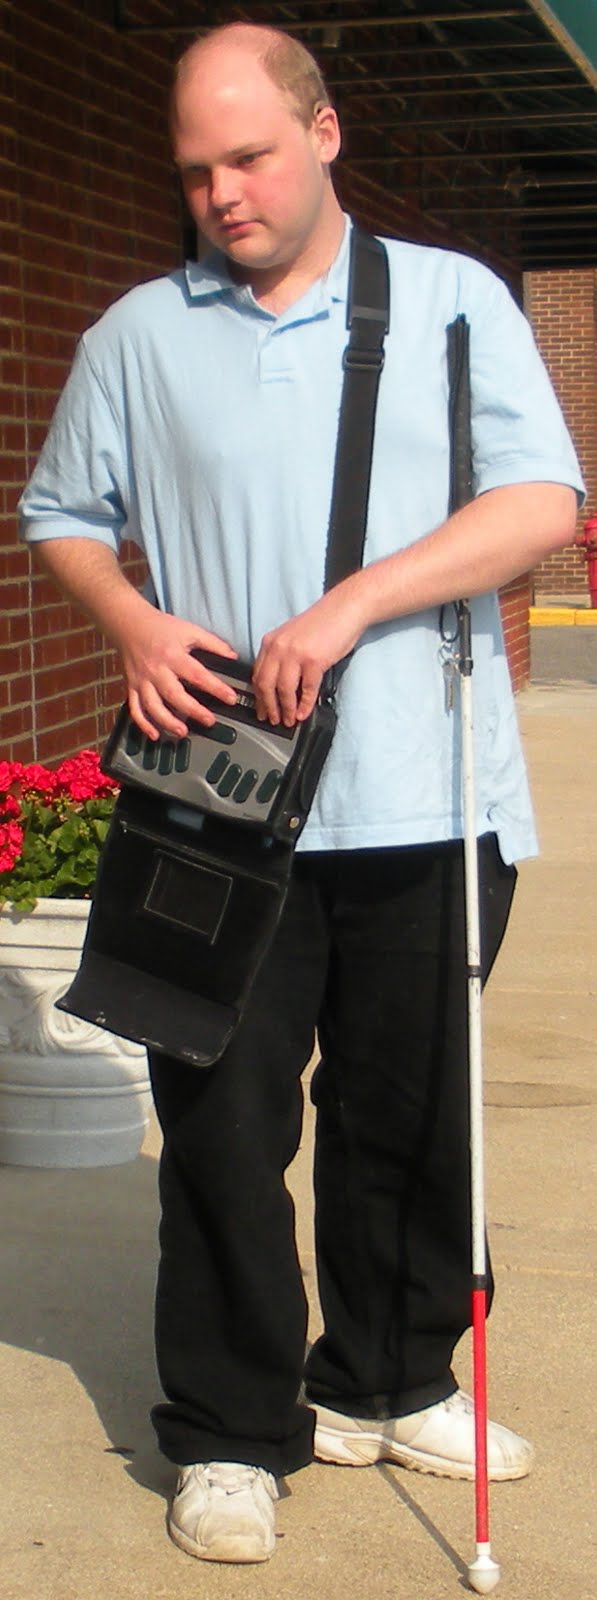 Photo of Scott Davert, standing on the sidewalk with his white cane and assistive technology